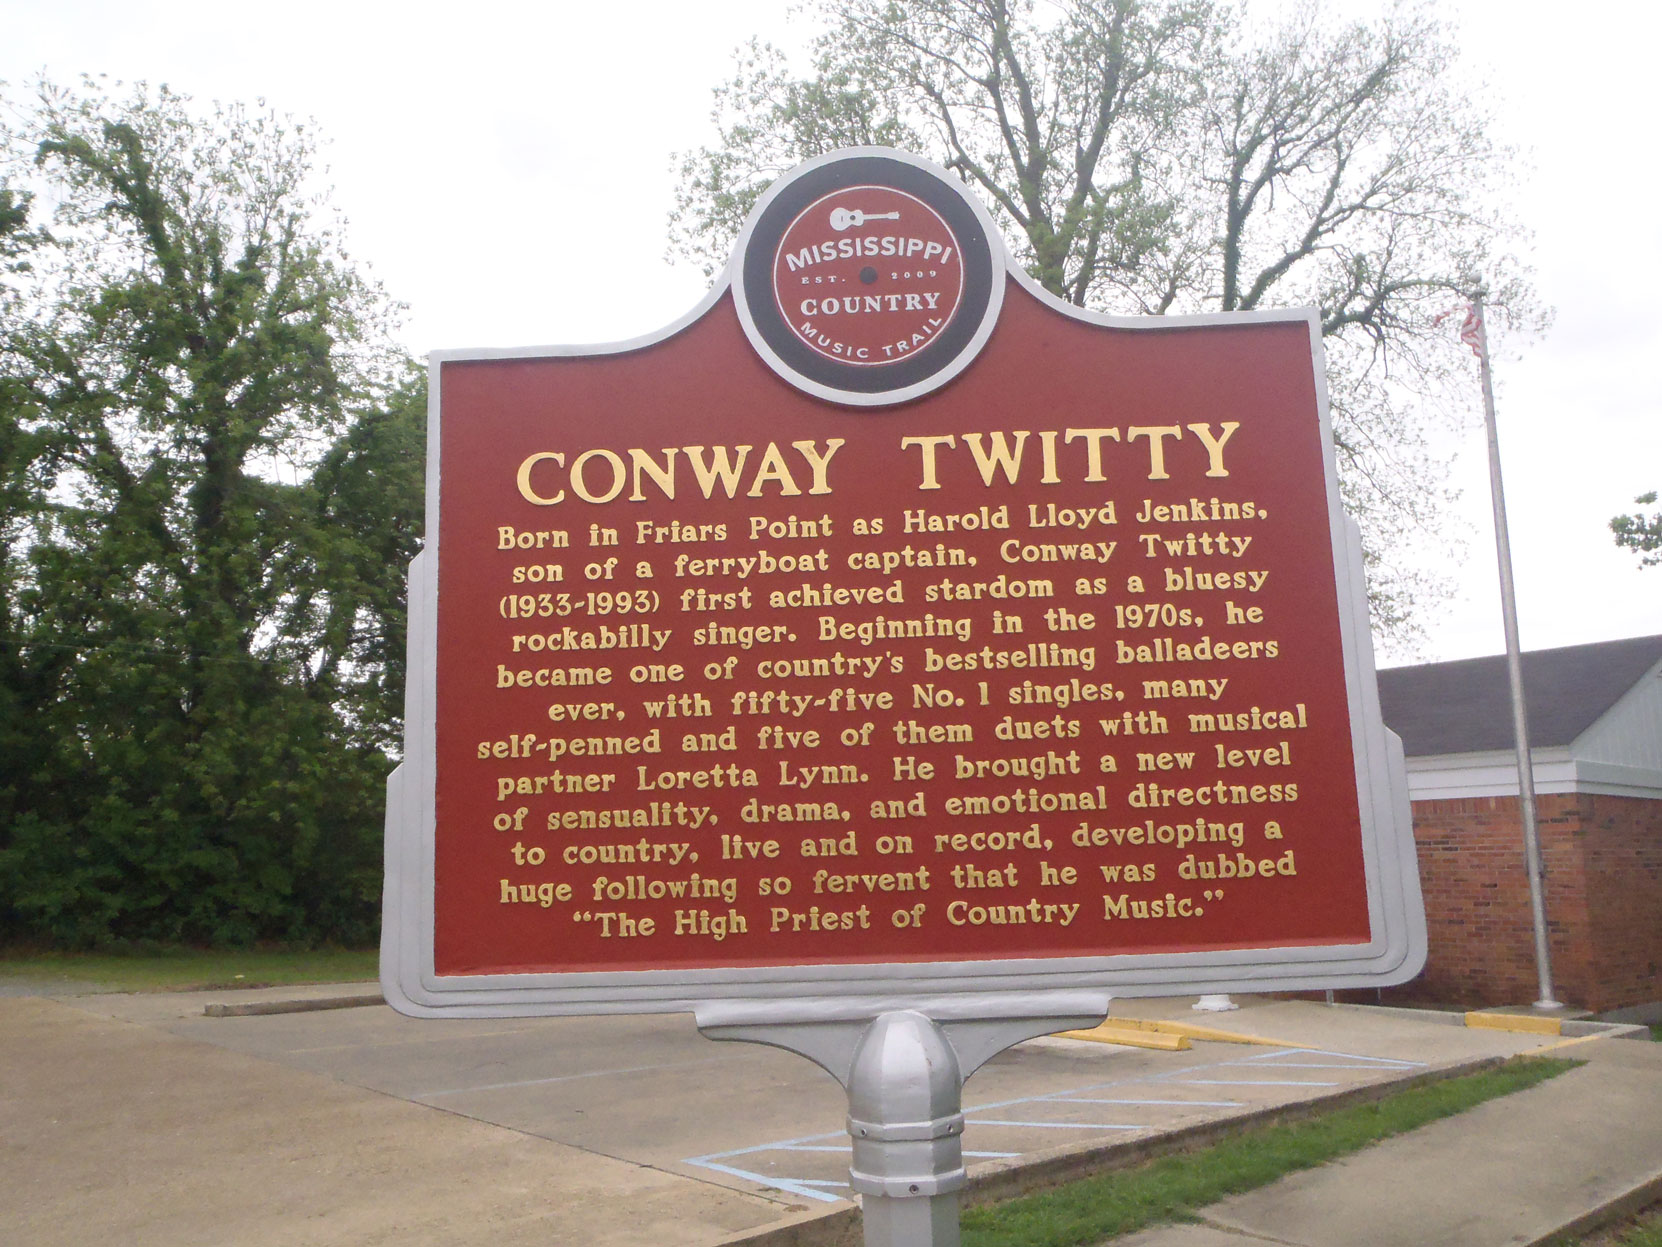 Mississippi Country Music Trail marker for Conway Twitty, Friar's Point, Mississippi (photo: Mississippi Blues Travellers)